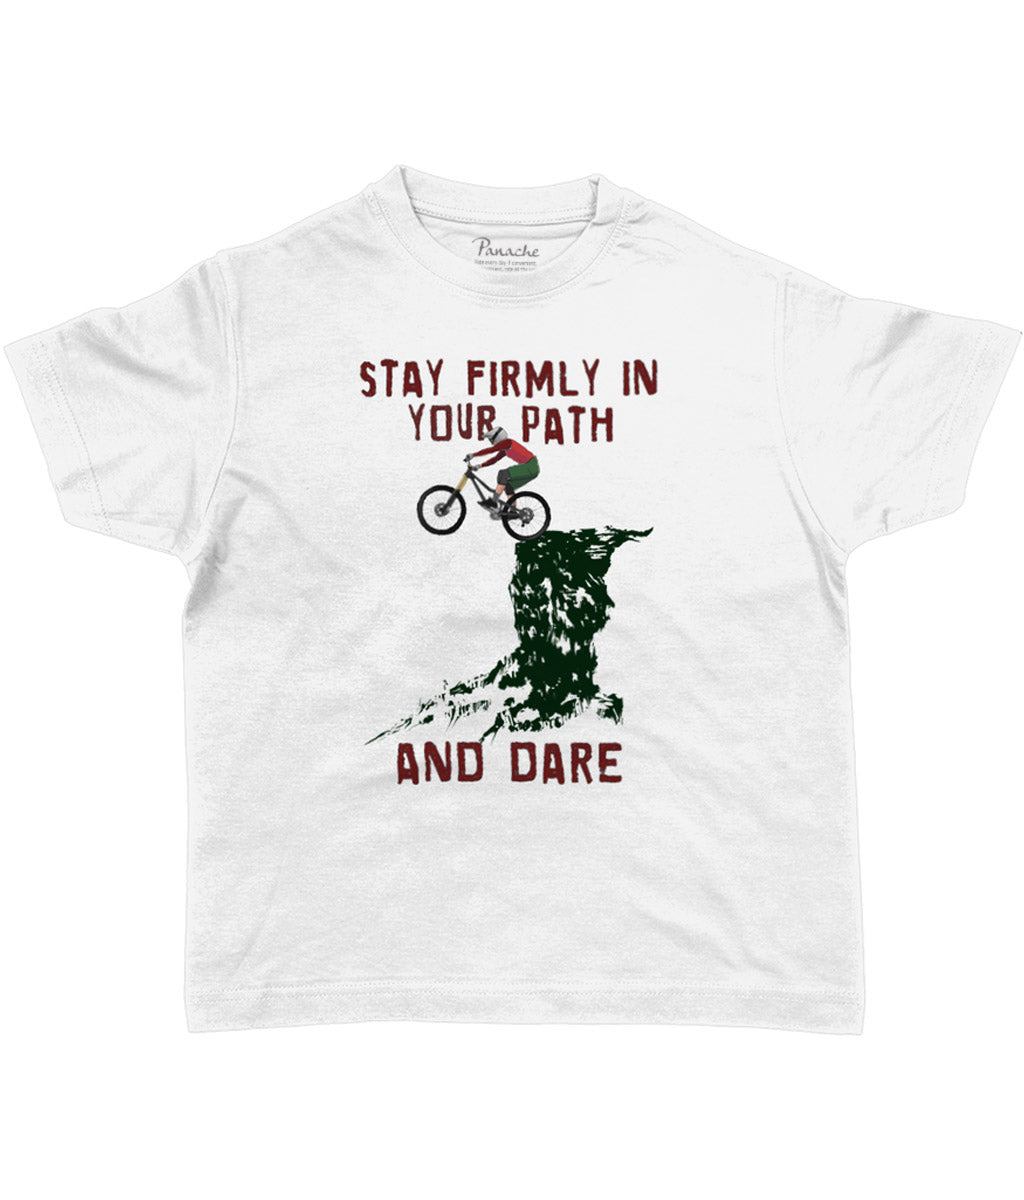 Stay Firmly in Your Path and Dare Kids Cycling T-shirt White